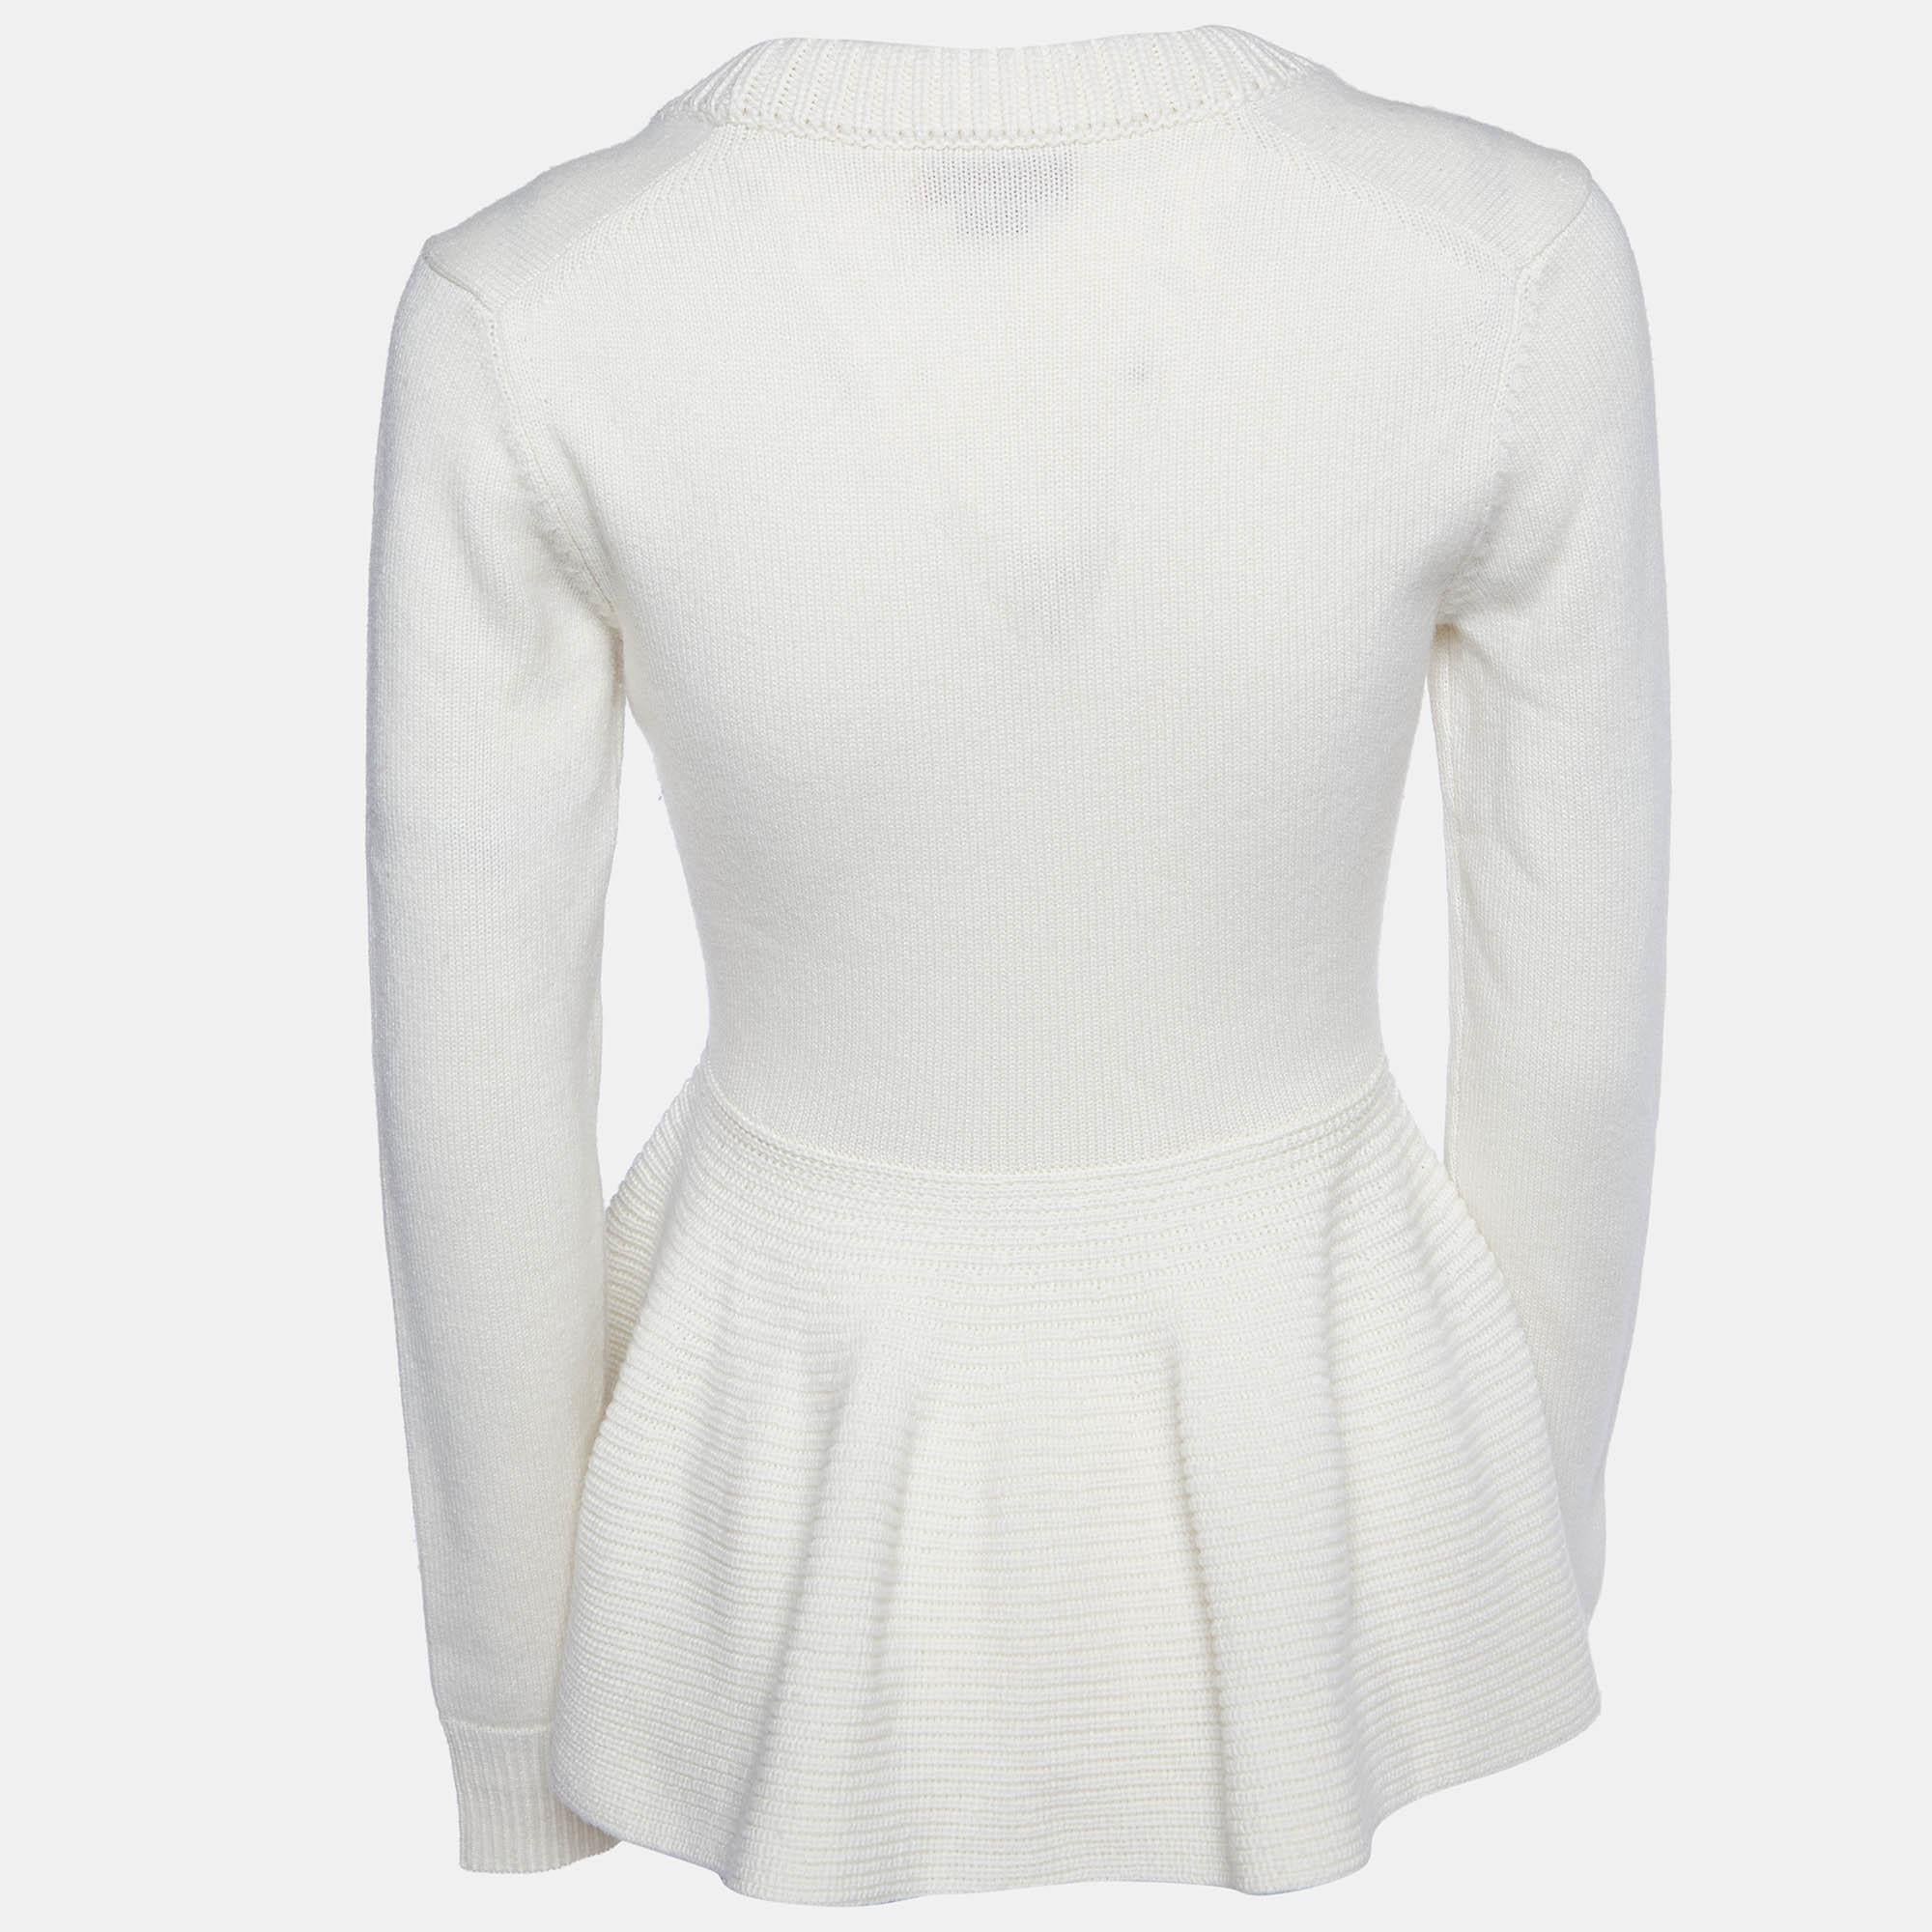 On days you desire to put little or no effort into your outfits, a stylish jumper like this comes in handy. It is cut from quality fabrics and showcases a classic style. Pair it with jeans and sneakers.

